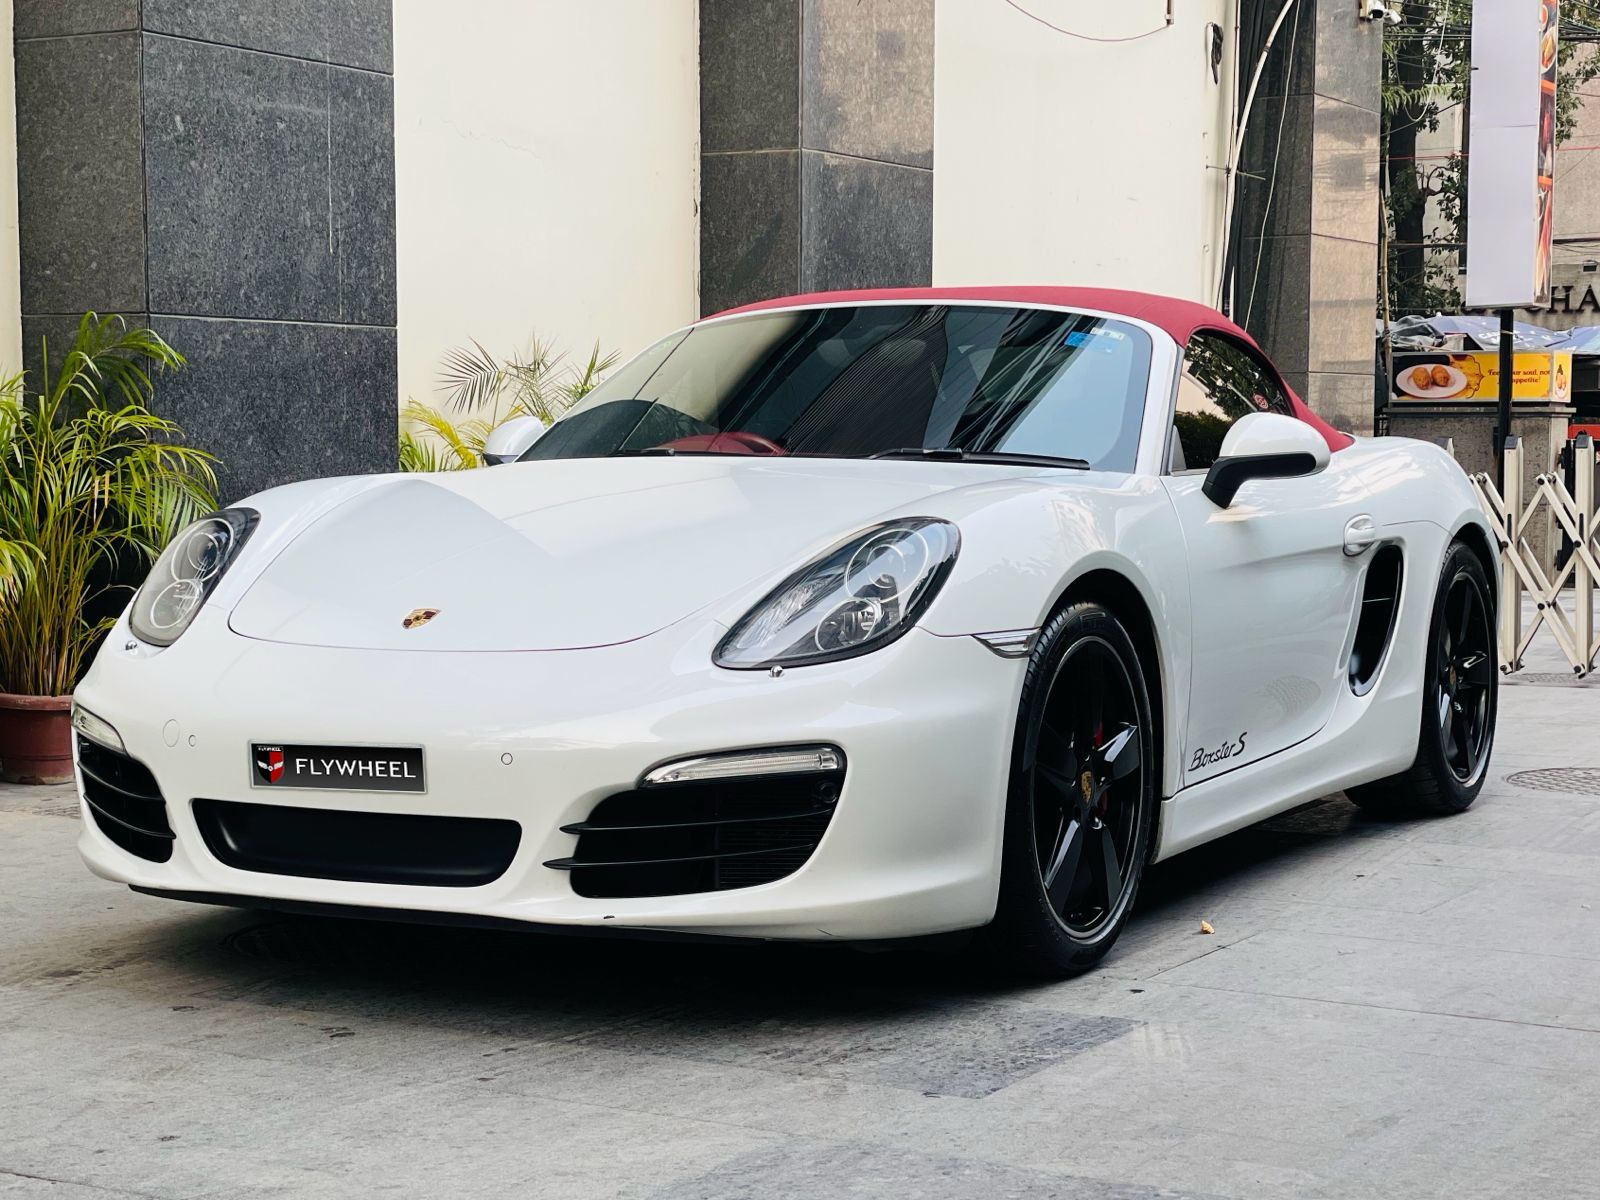 Porsche Boxster S BS IV 2015: A Fusion of Luxury and Performance